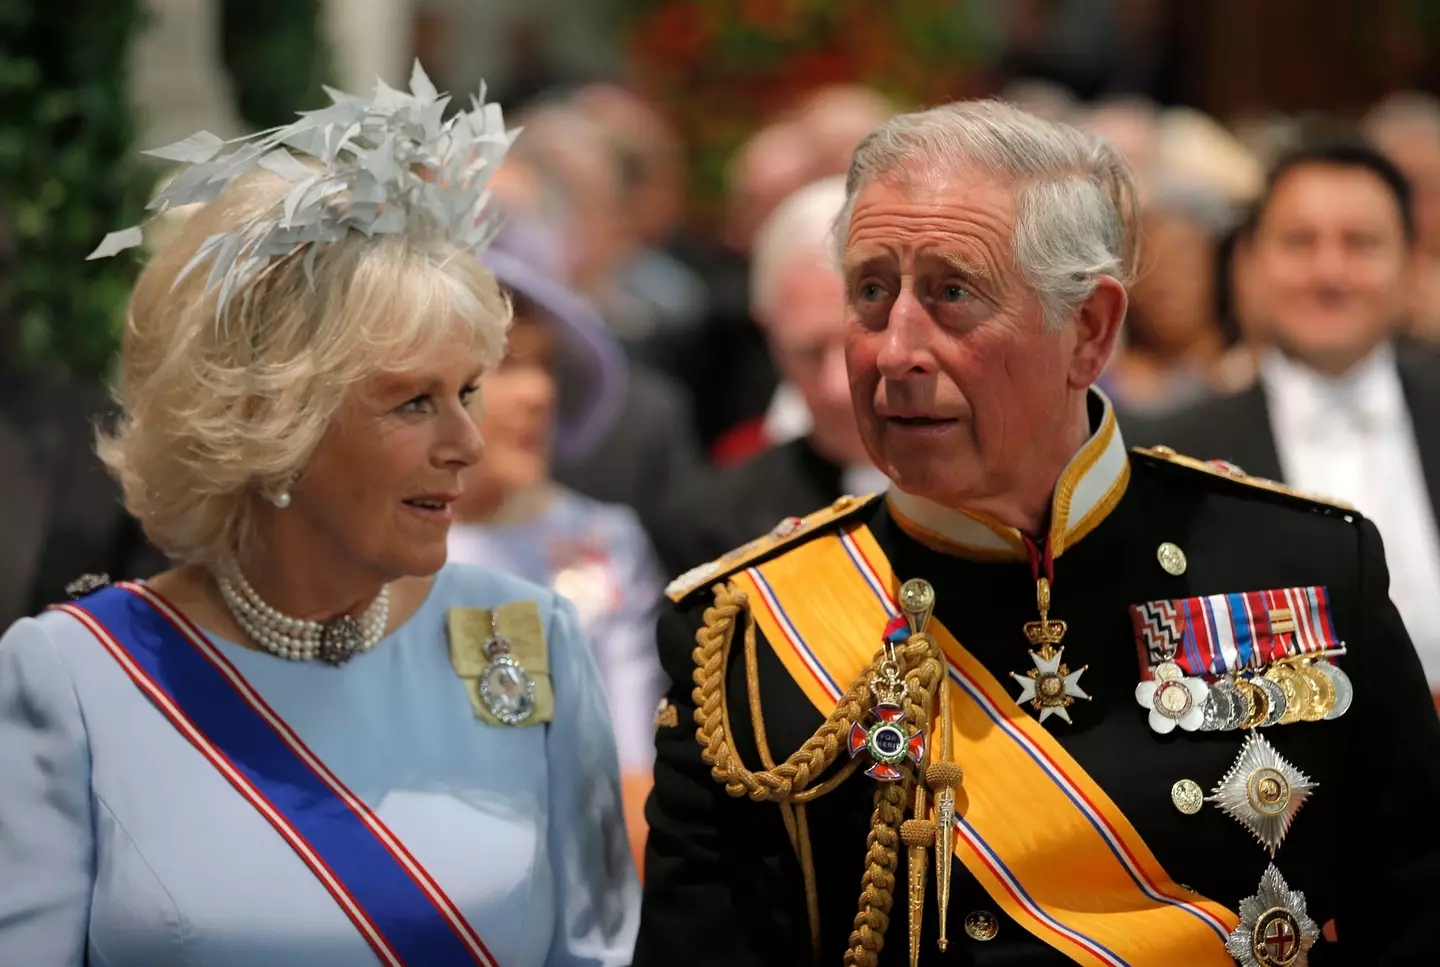 King Charles and the Queen Consort are set to be crowned today.